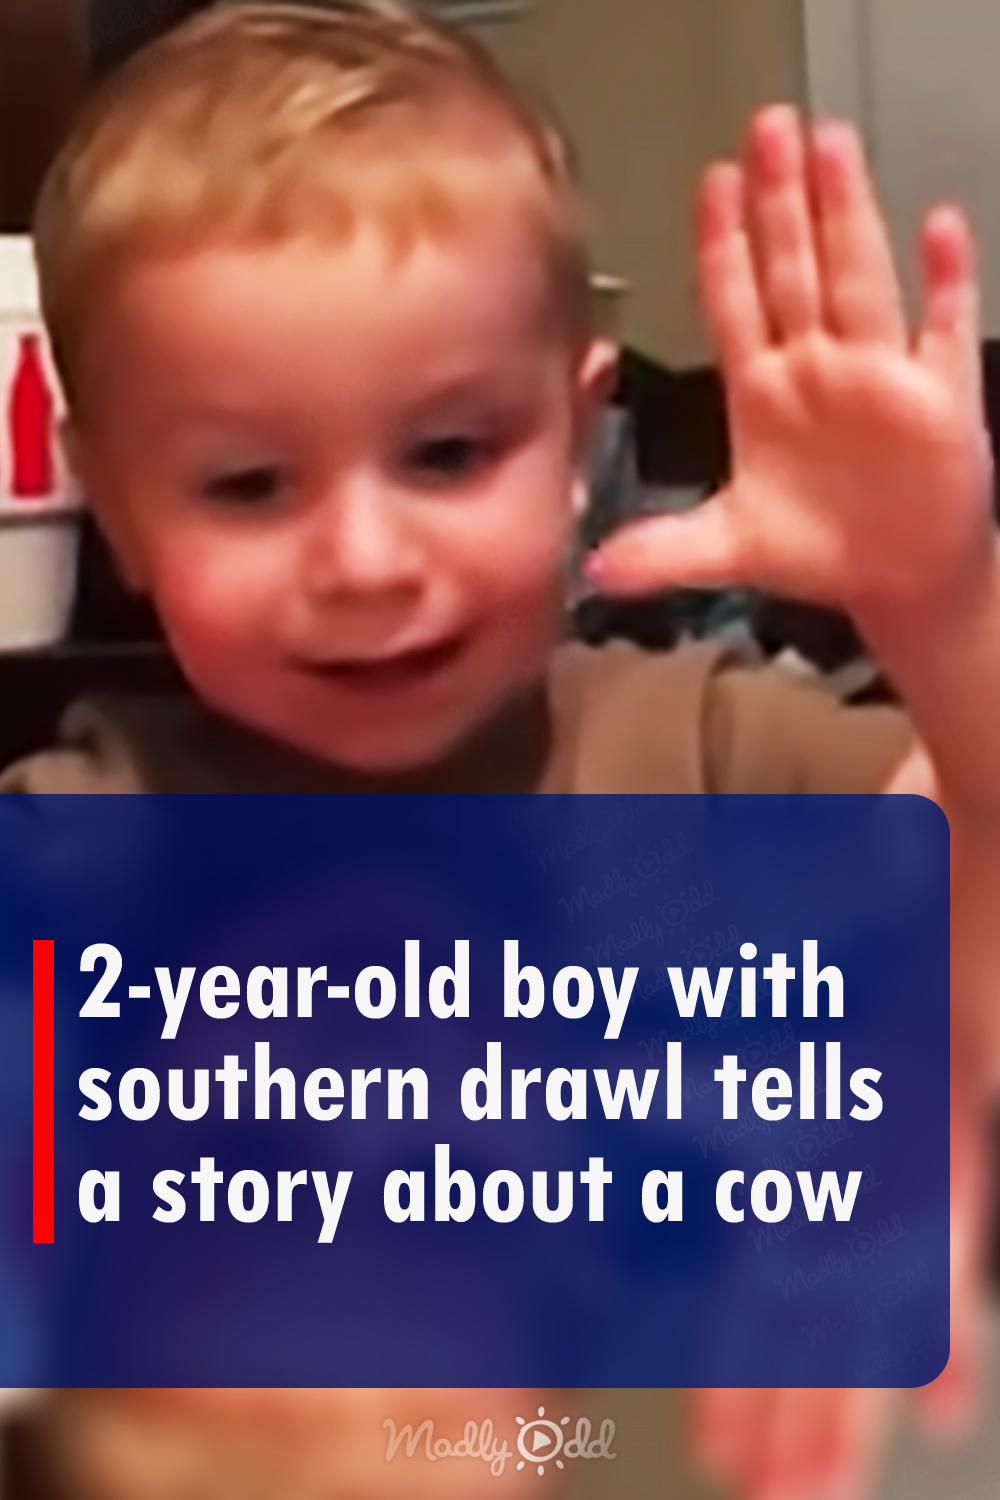 2-year-old boy with southern drawl tells a story about a cow